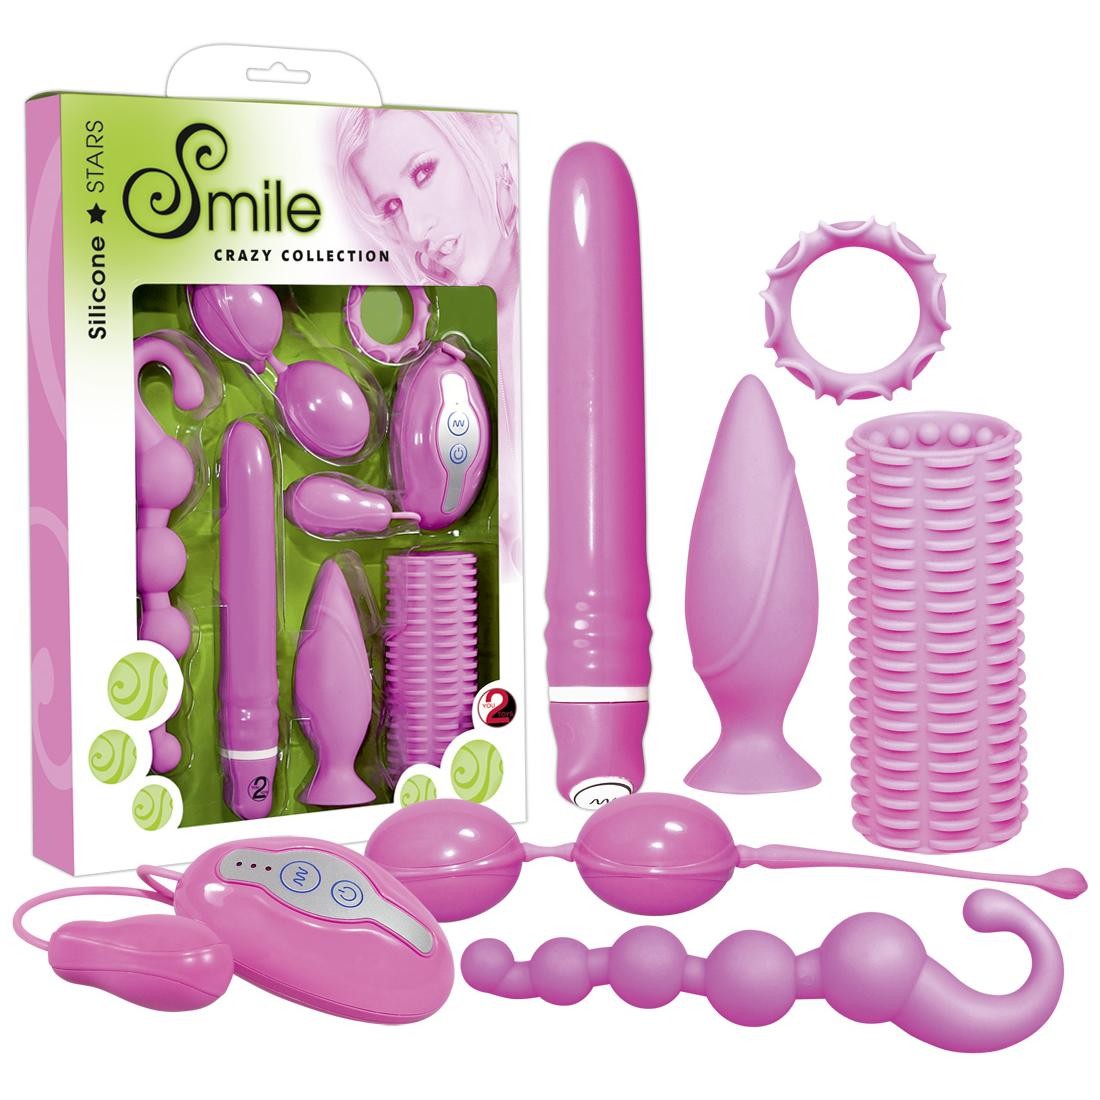  YOU2TOYS  -  Smile  Crazy  Collection  -  Toy-Set  7teilig 